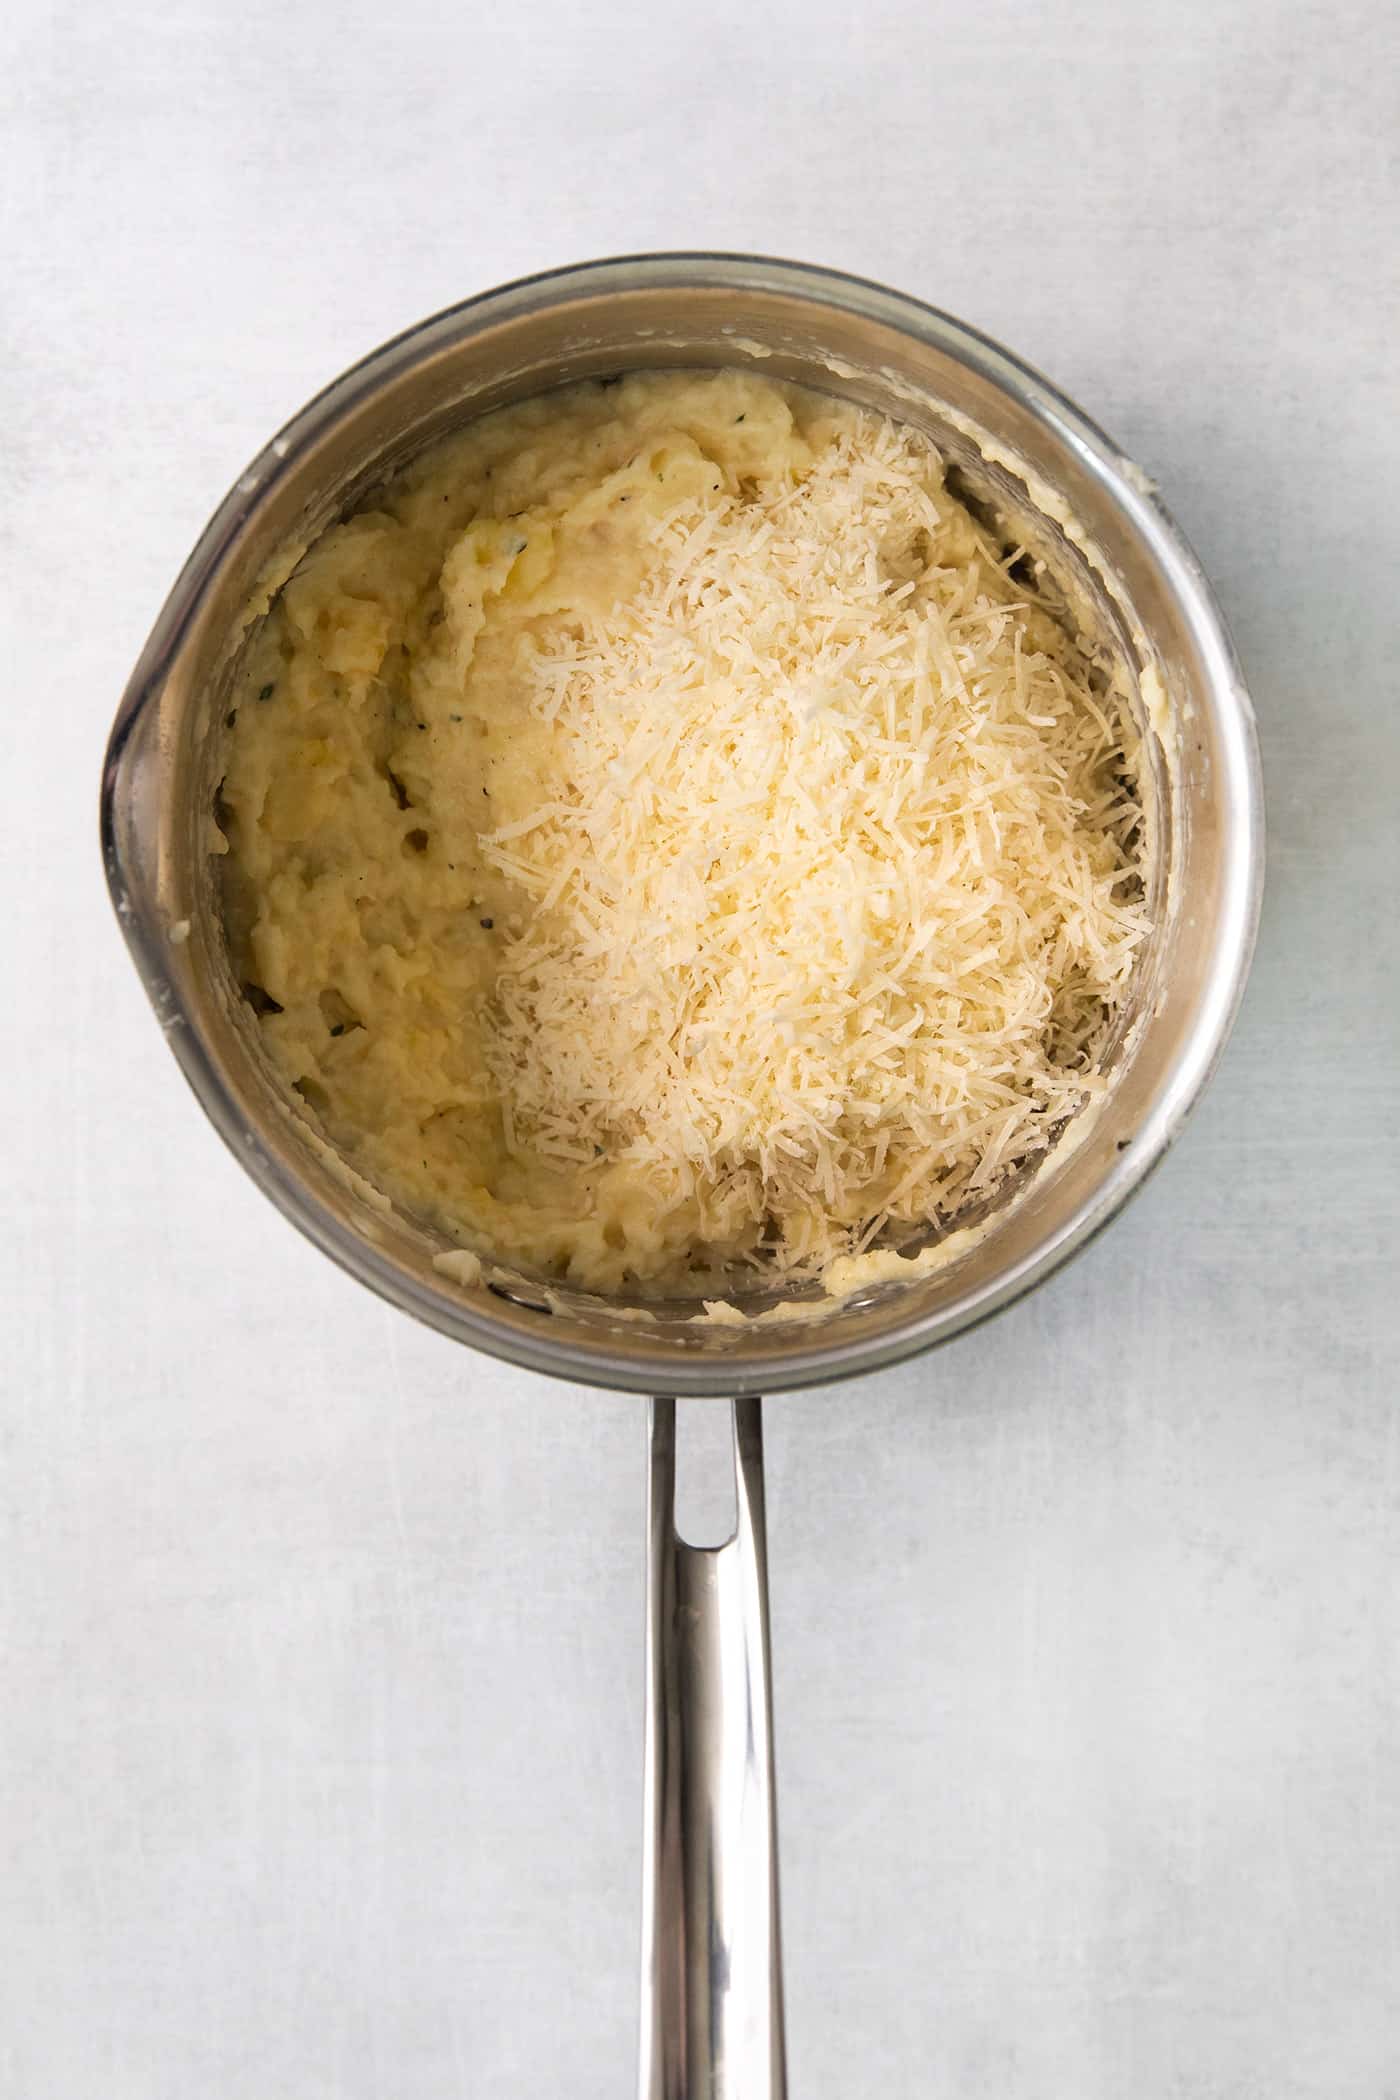 Mashed parsnips in a saucepan